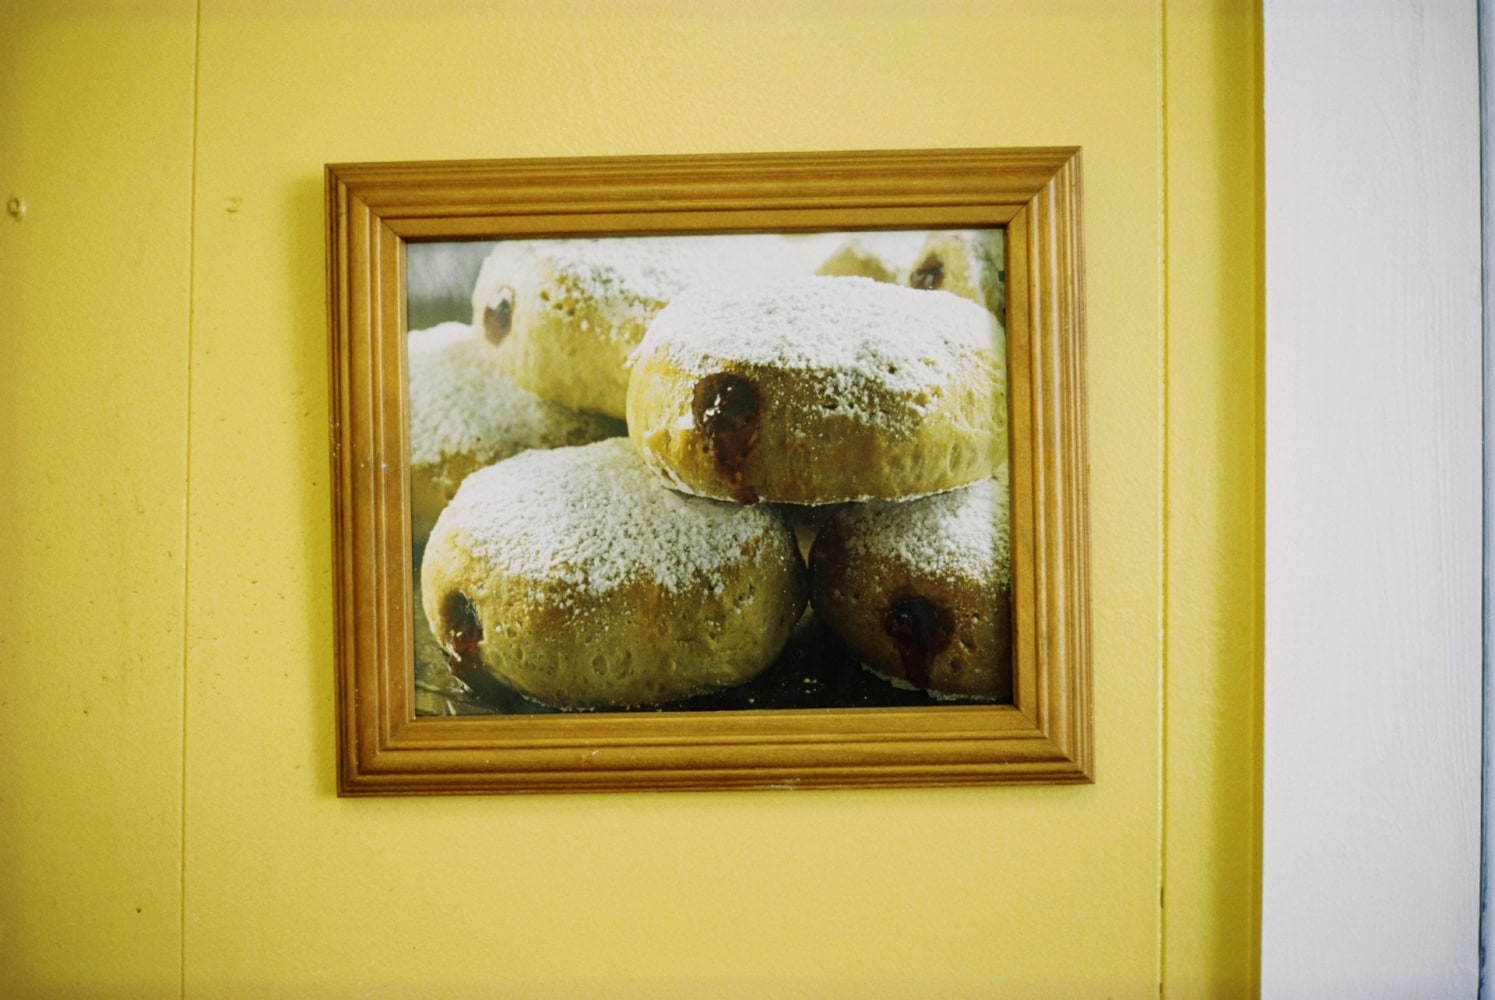 Image of a yellow wall and framed photograph of powdered jelly donuts by Mickey Aloisio